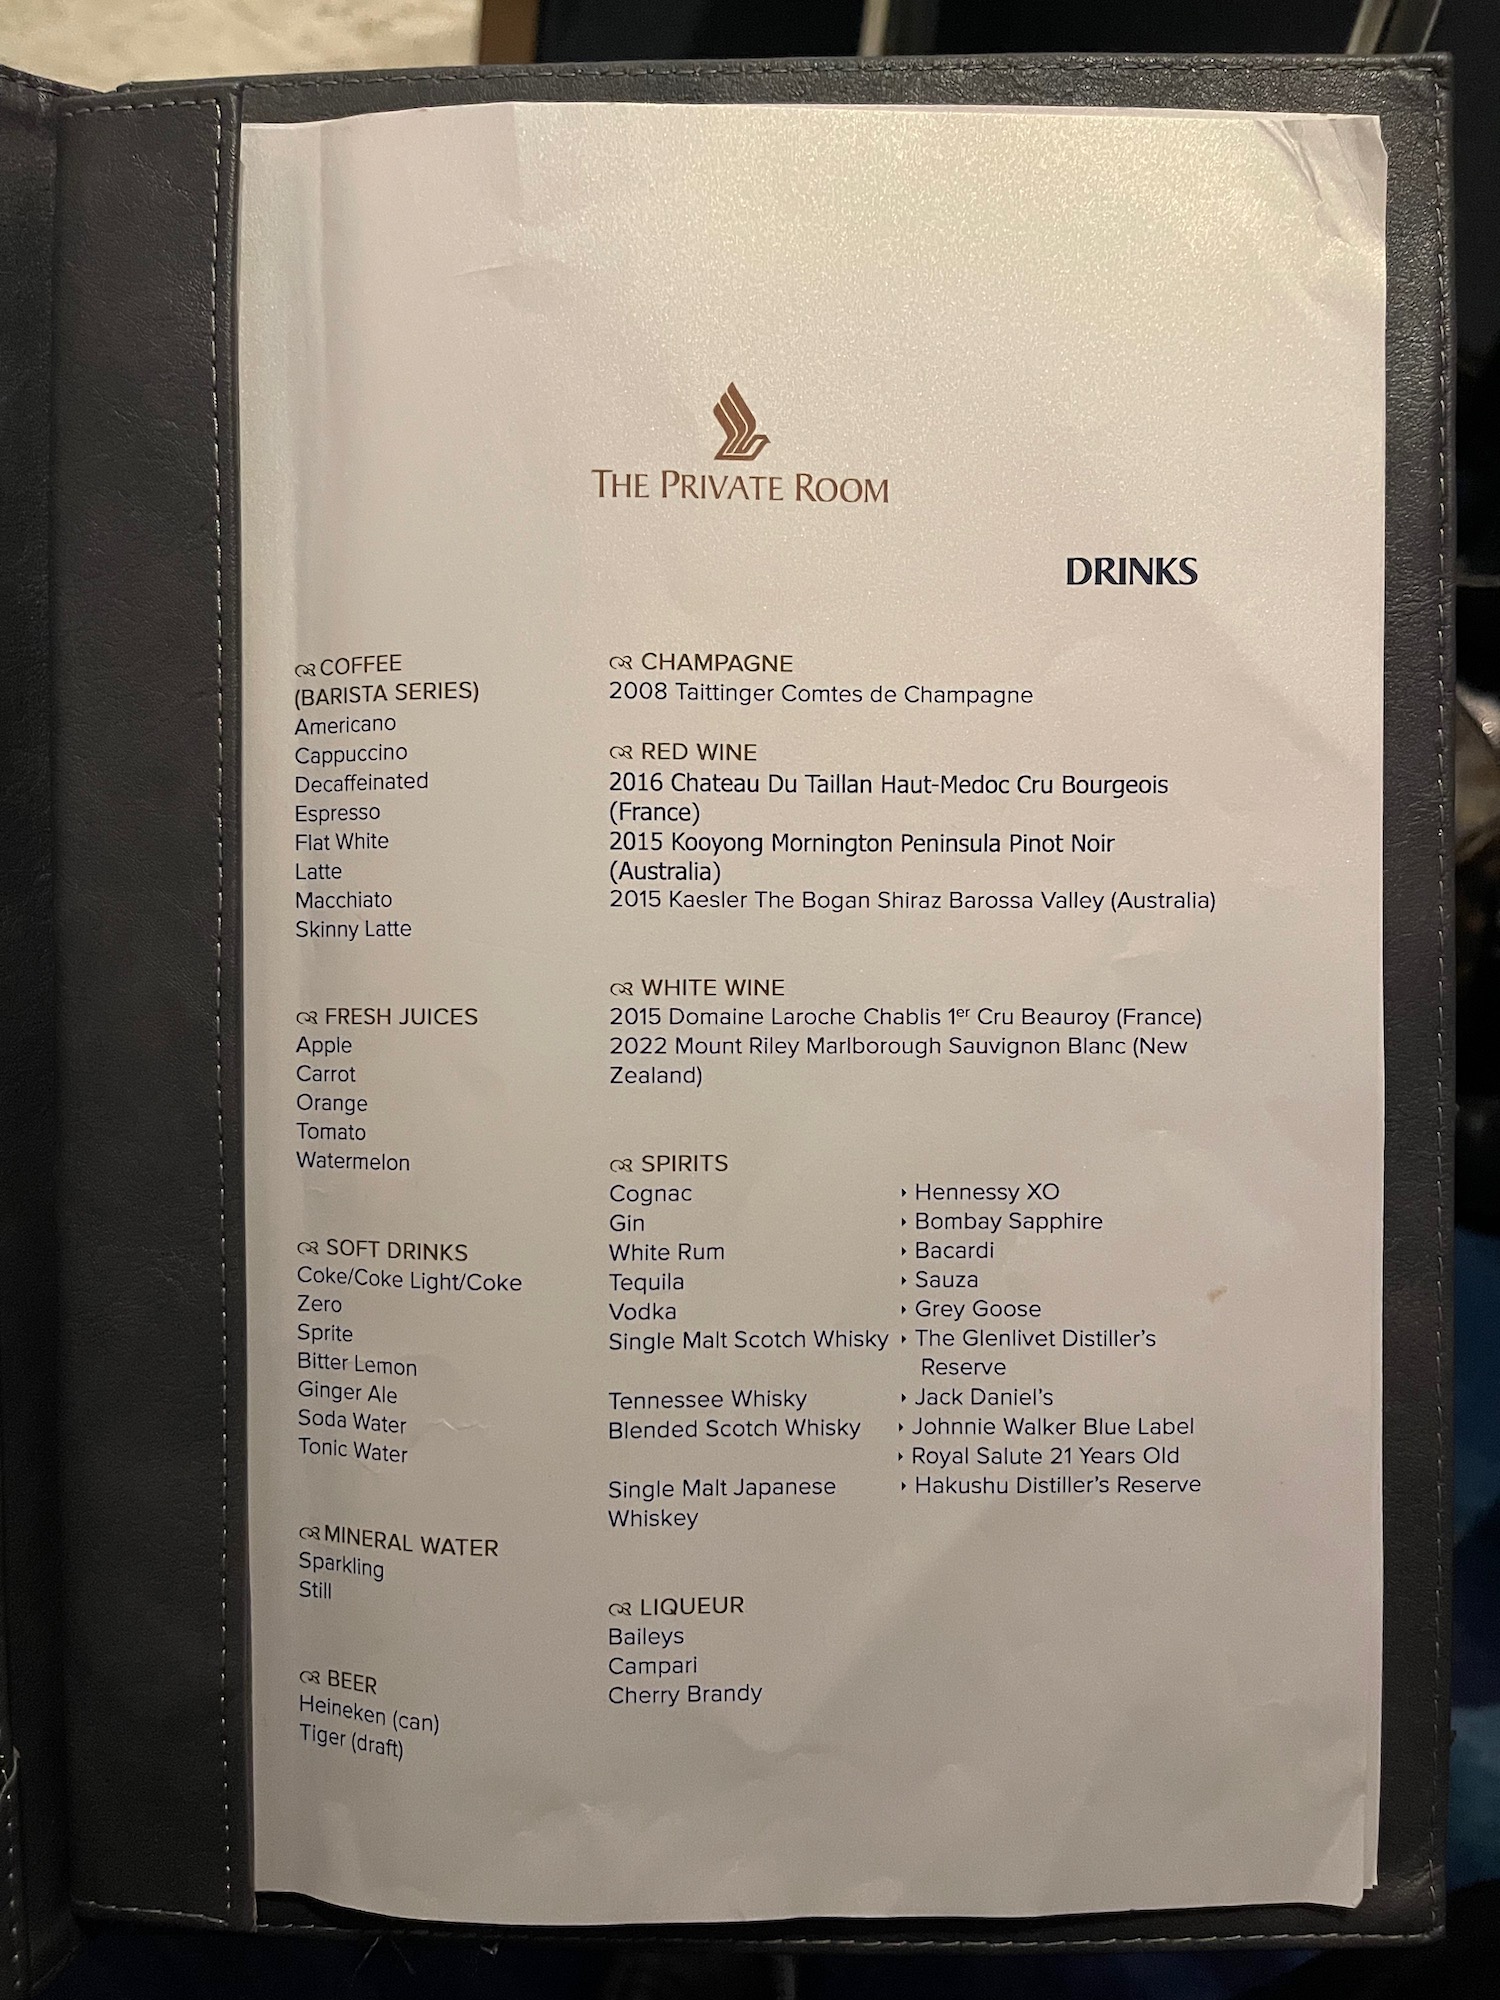 a menu with text on it